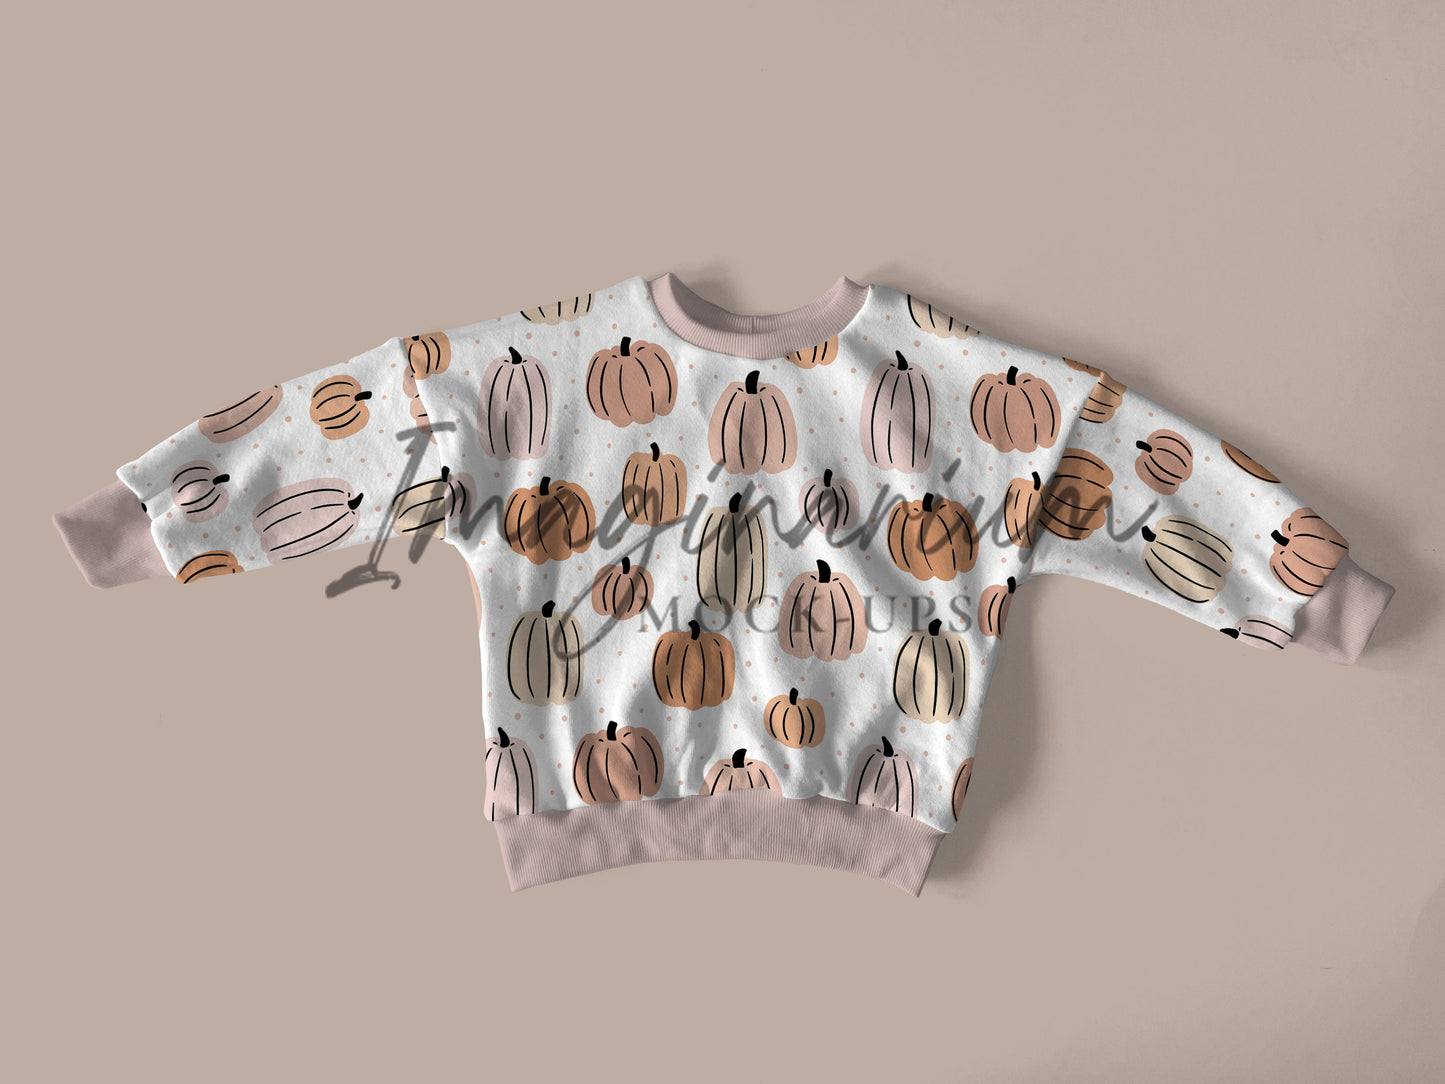 Oversized Sweater Thick and Normal Neckband Mock Up, Realistic Clothing Mockup for Photoshop and Procreate